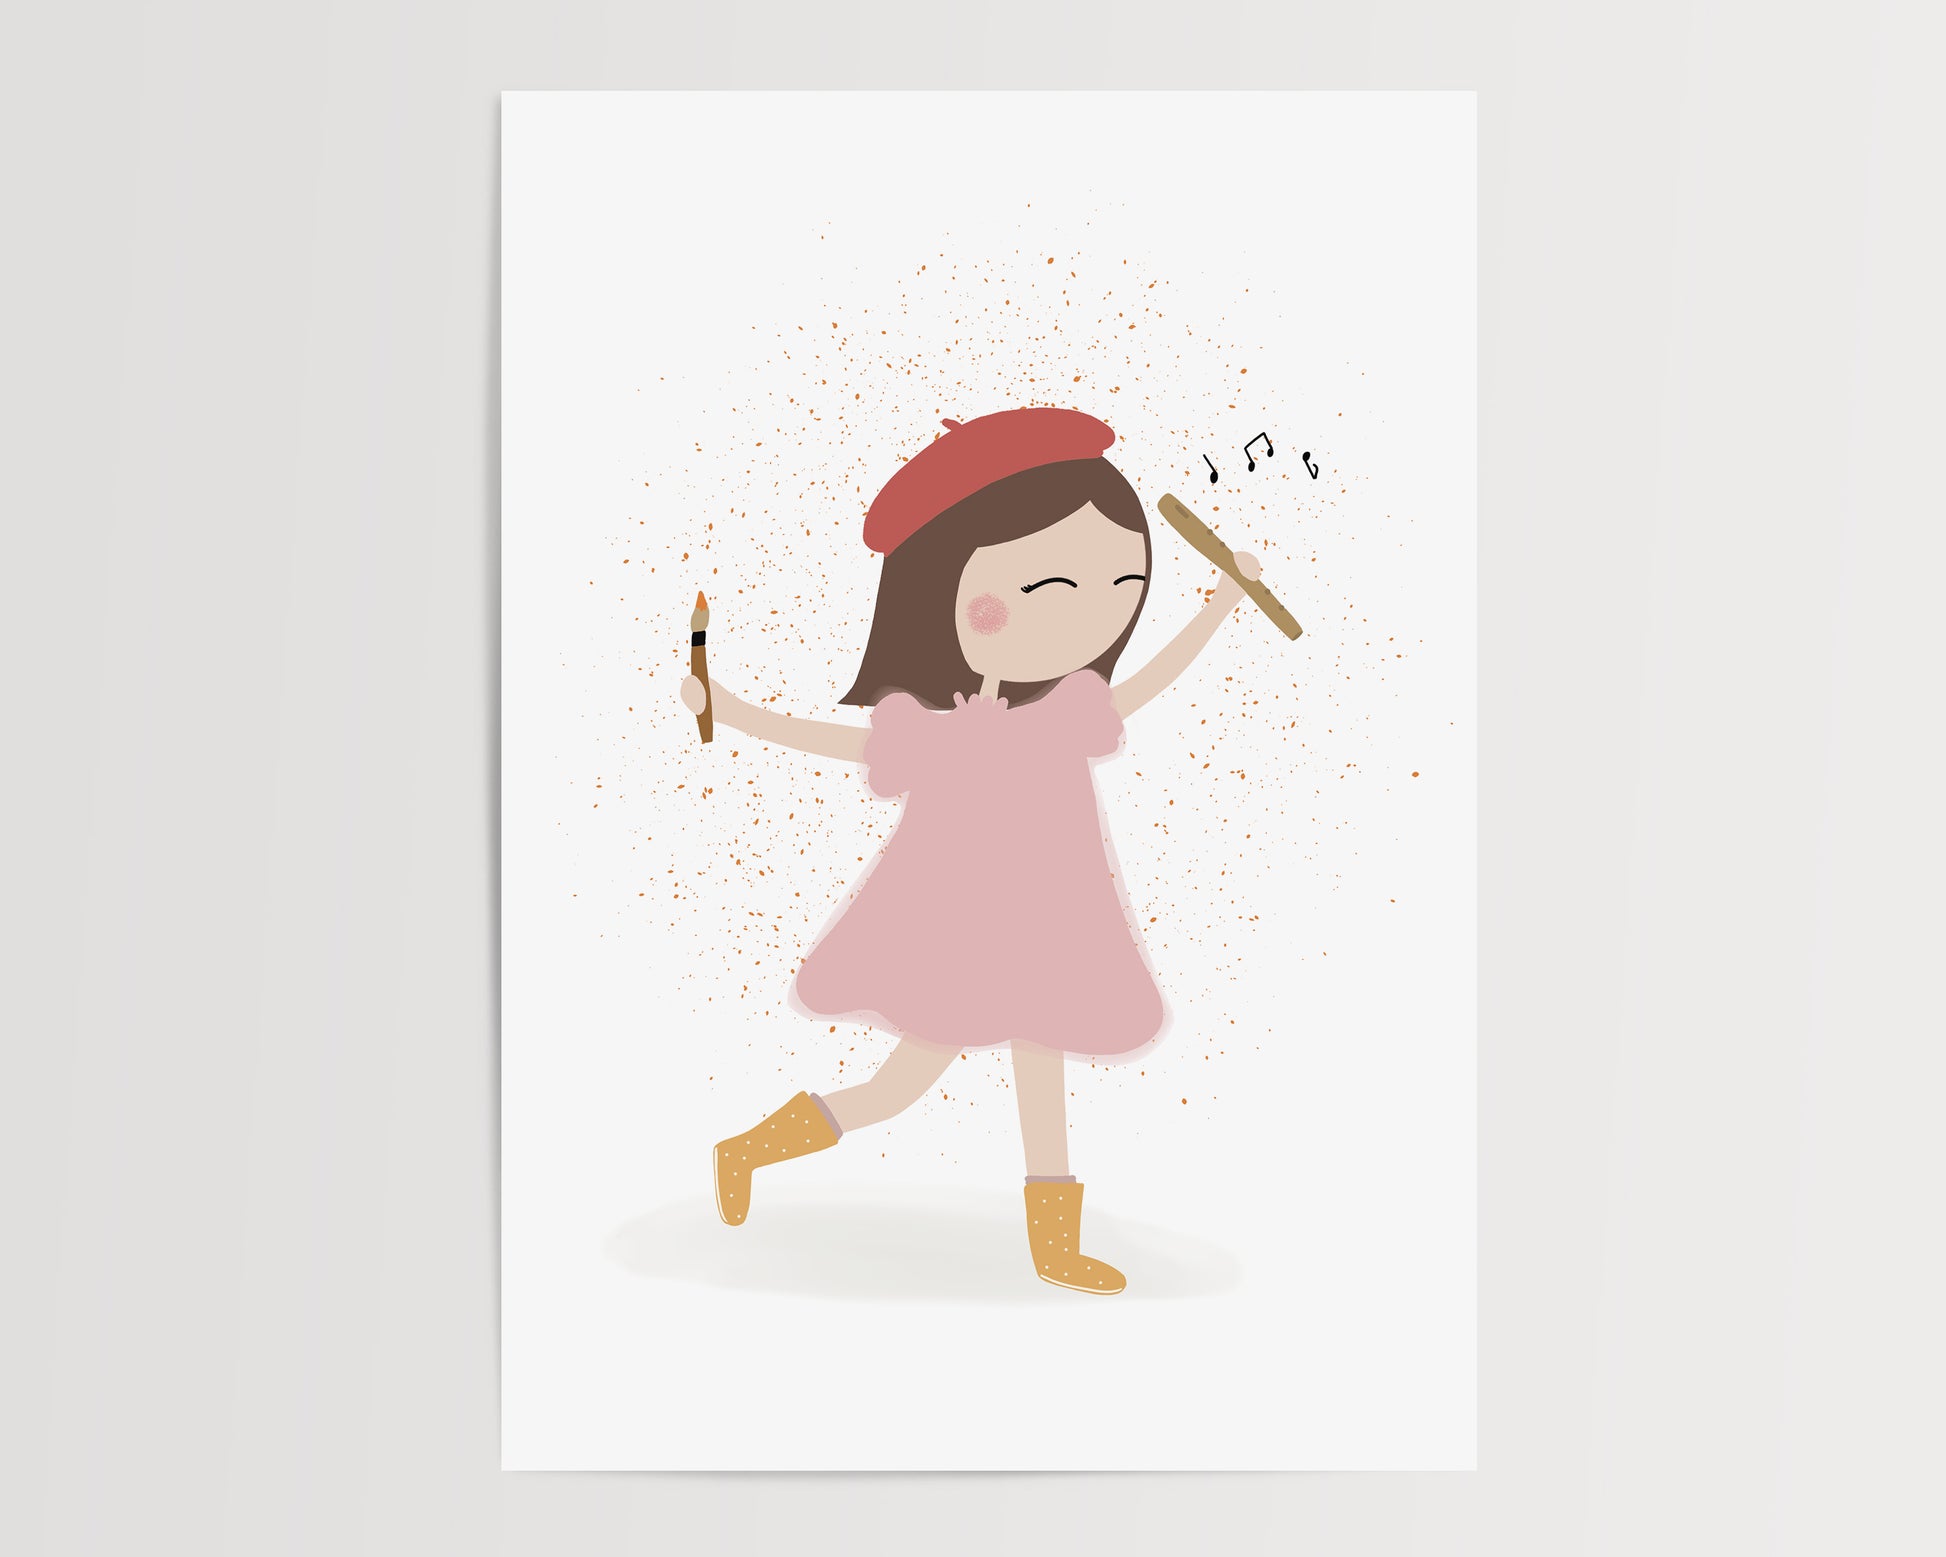 Girl with a paintbrush and flute illustration by Jollie Bluebear